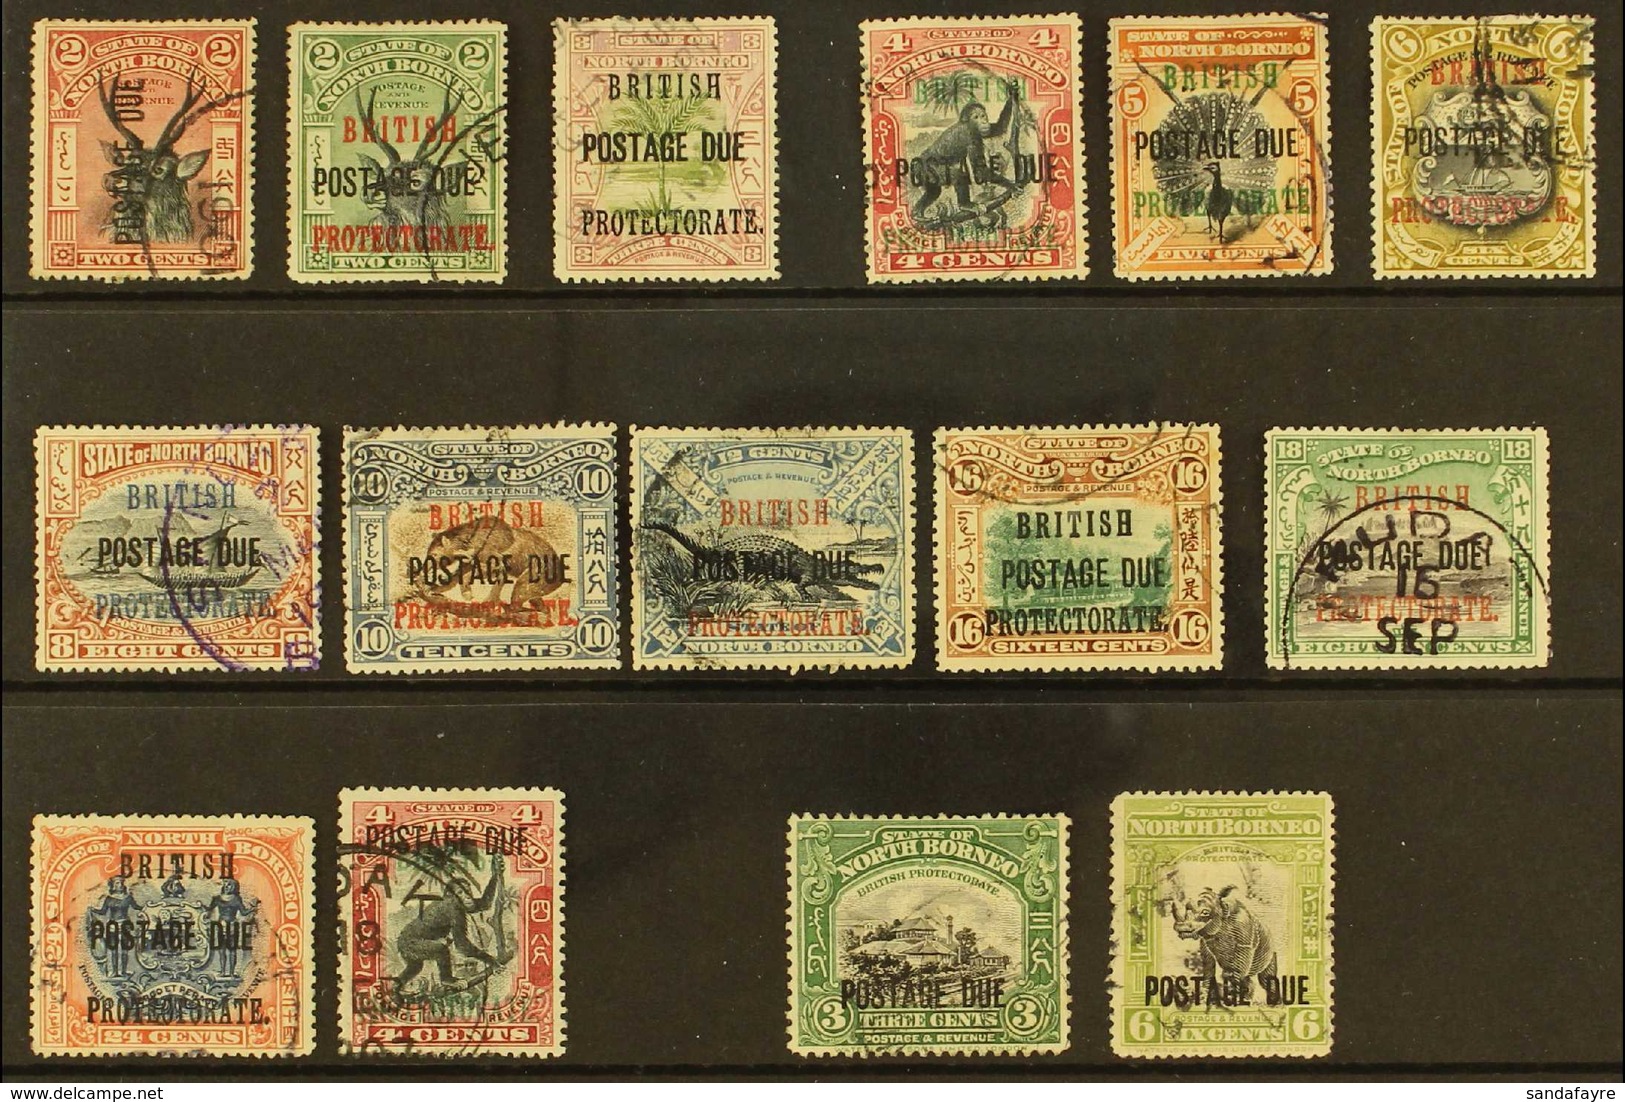 POSTAGE DUES 1897 - 1930 Fine Postally Used Selection With Cds Cancels Including 1902 Vals To 24c, 1906 4c Black And Car - Nordborneo (...-1963)